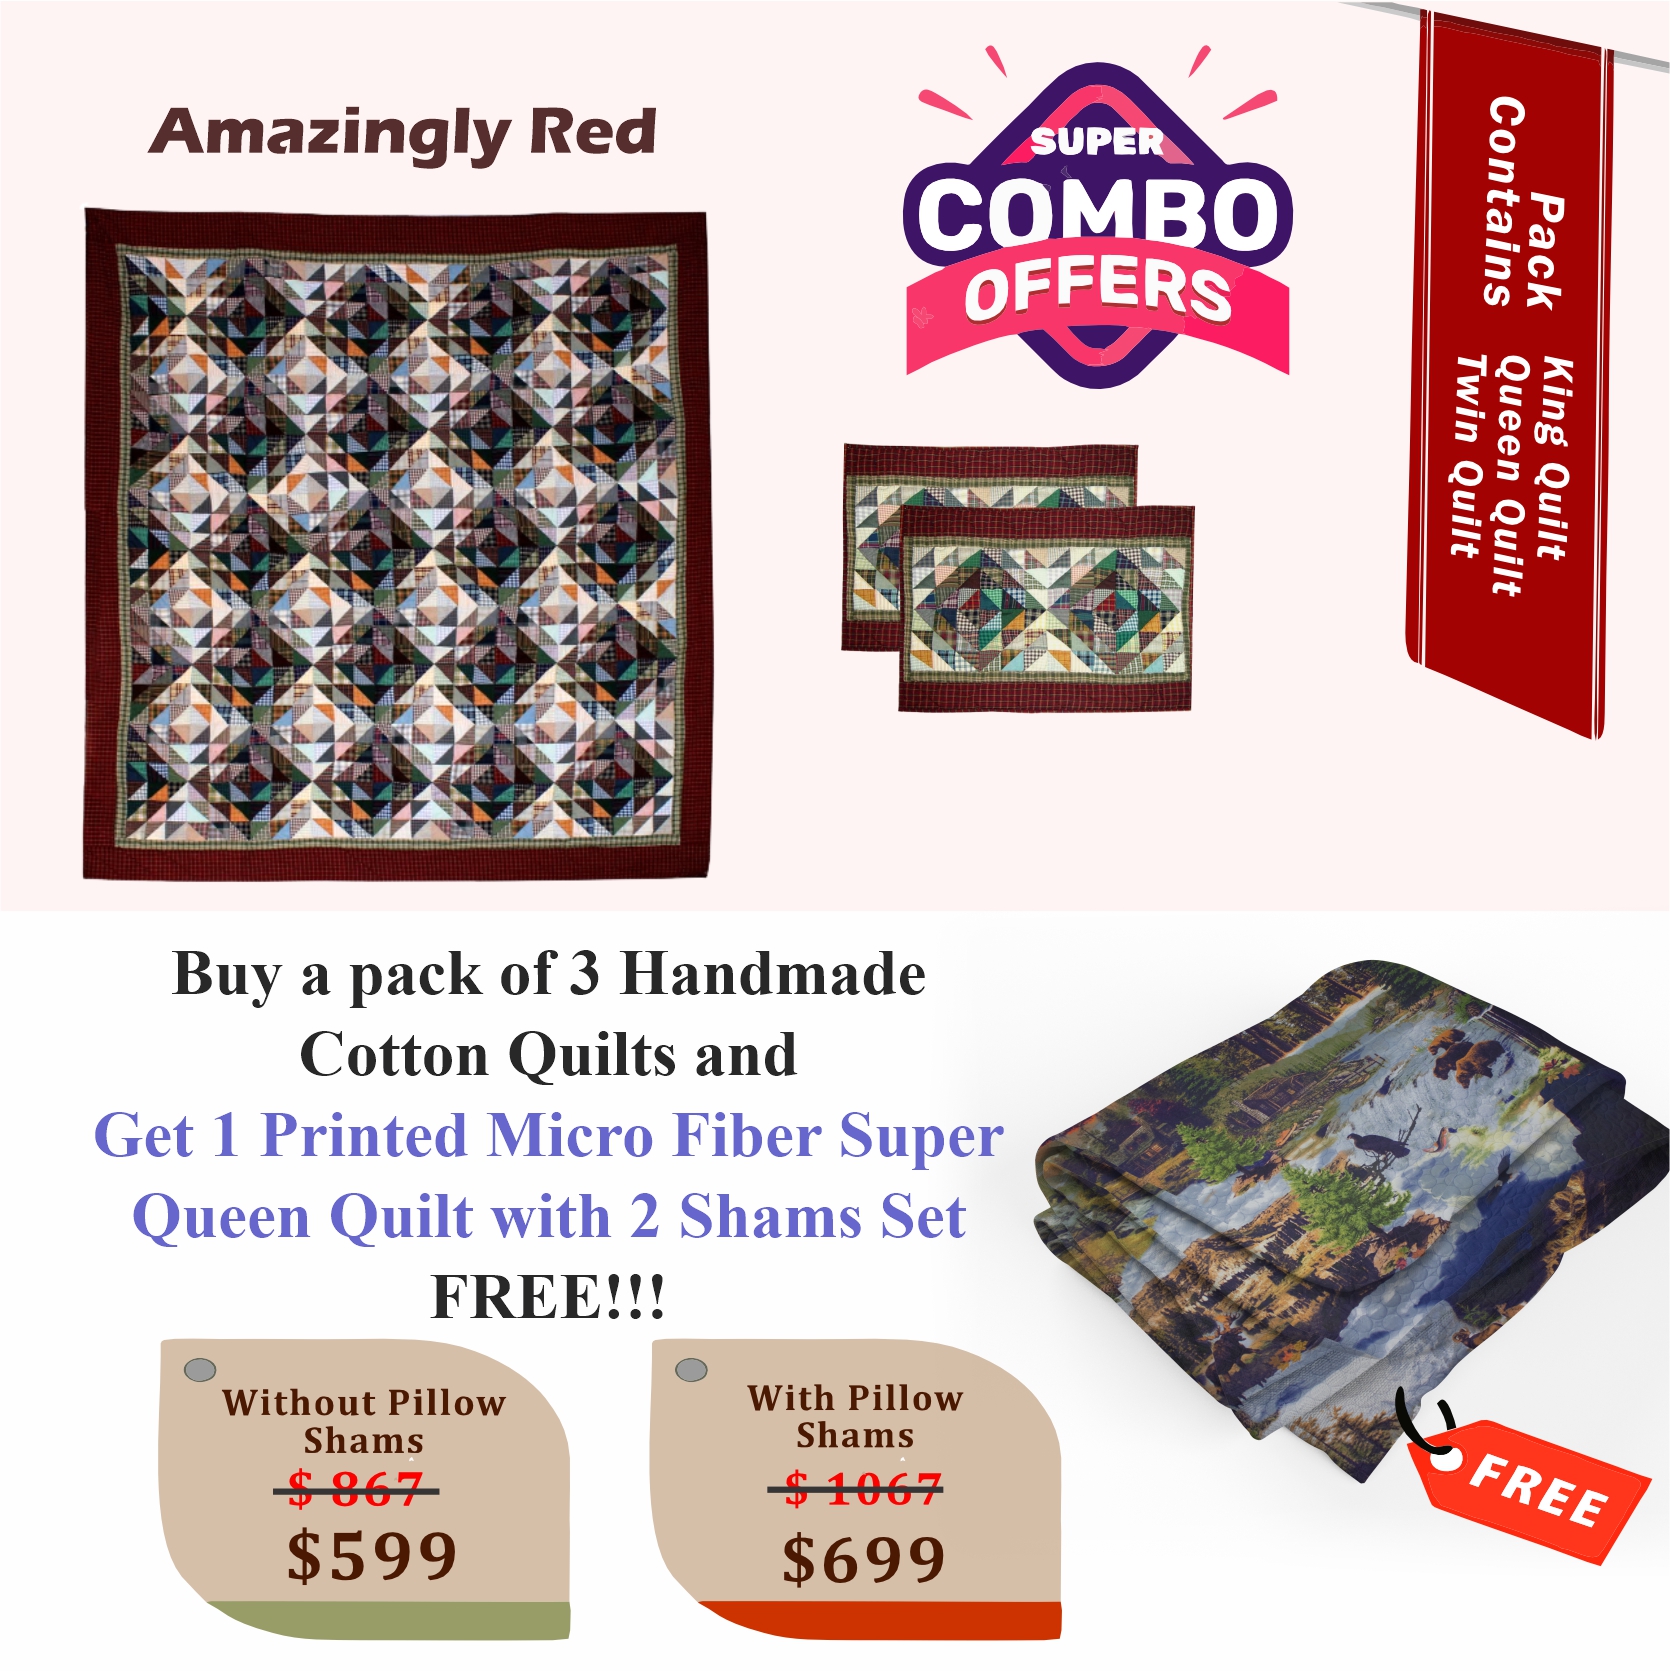 Amazingly Red- Handmade Cotton quilts | Matching pillow shams | Buy 3 cotton quilts and get 1 Printed Microfiber Super Queen Quilt with 2 Shams set FREE